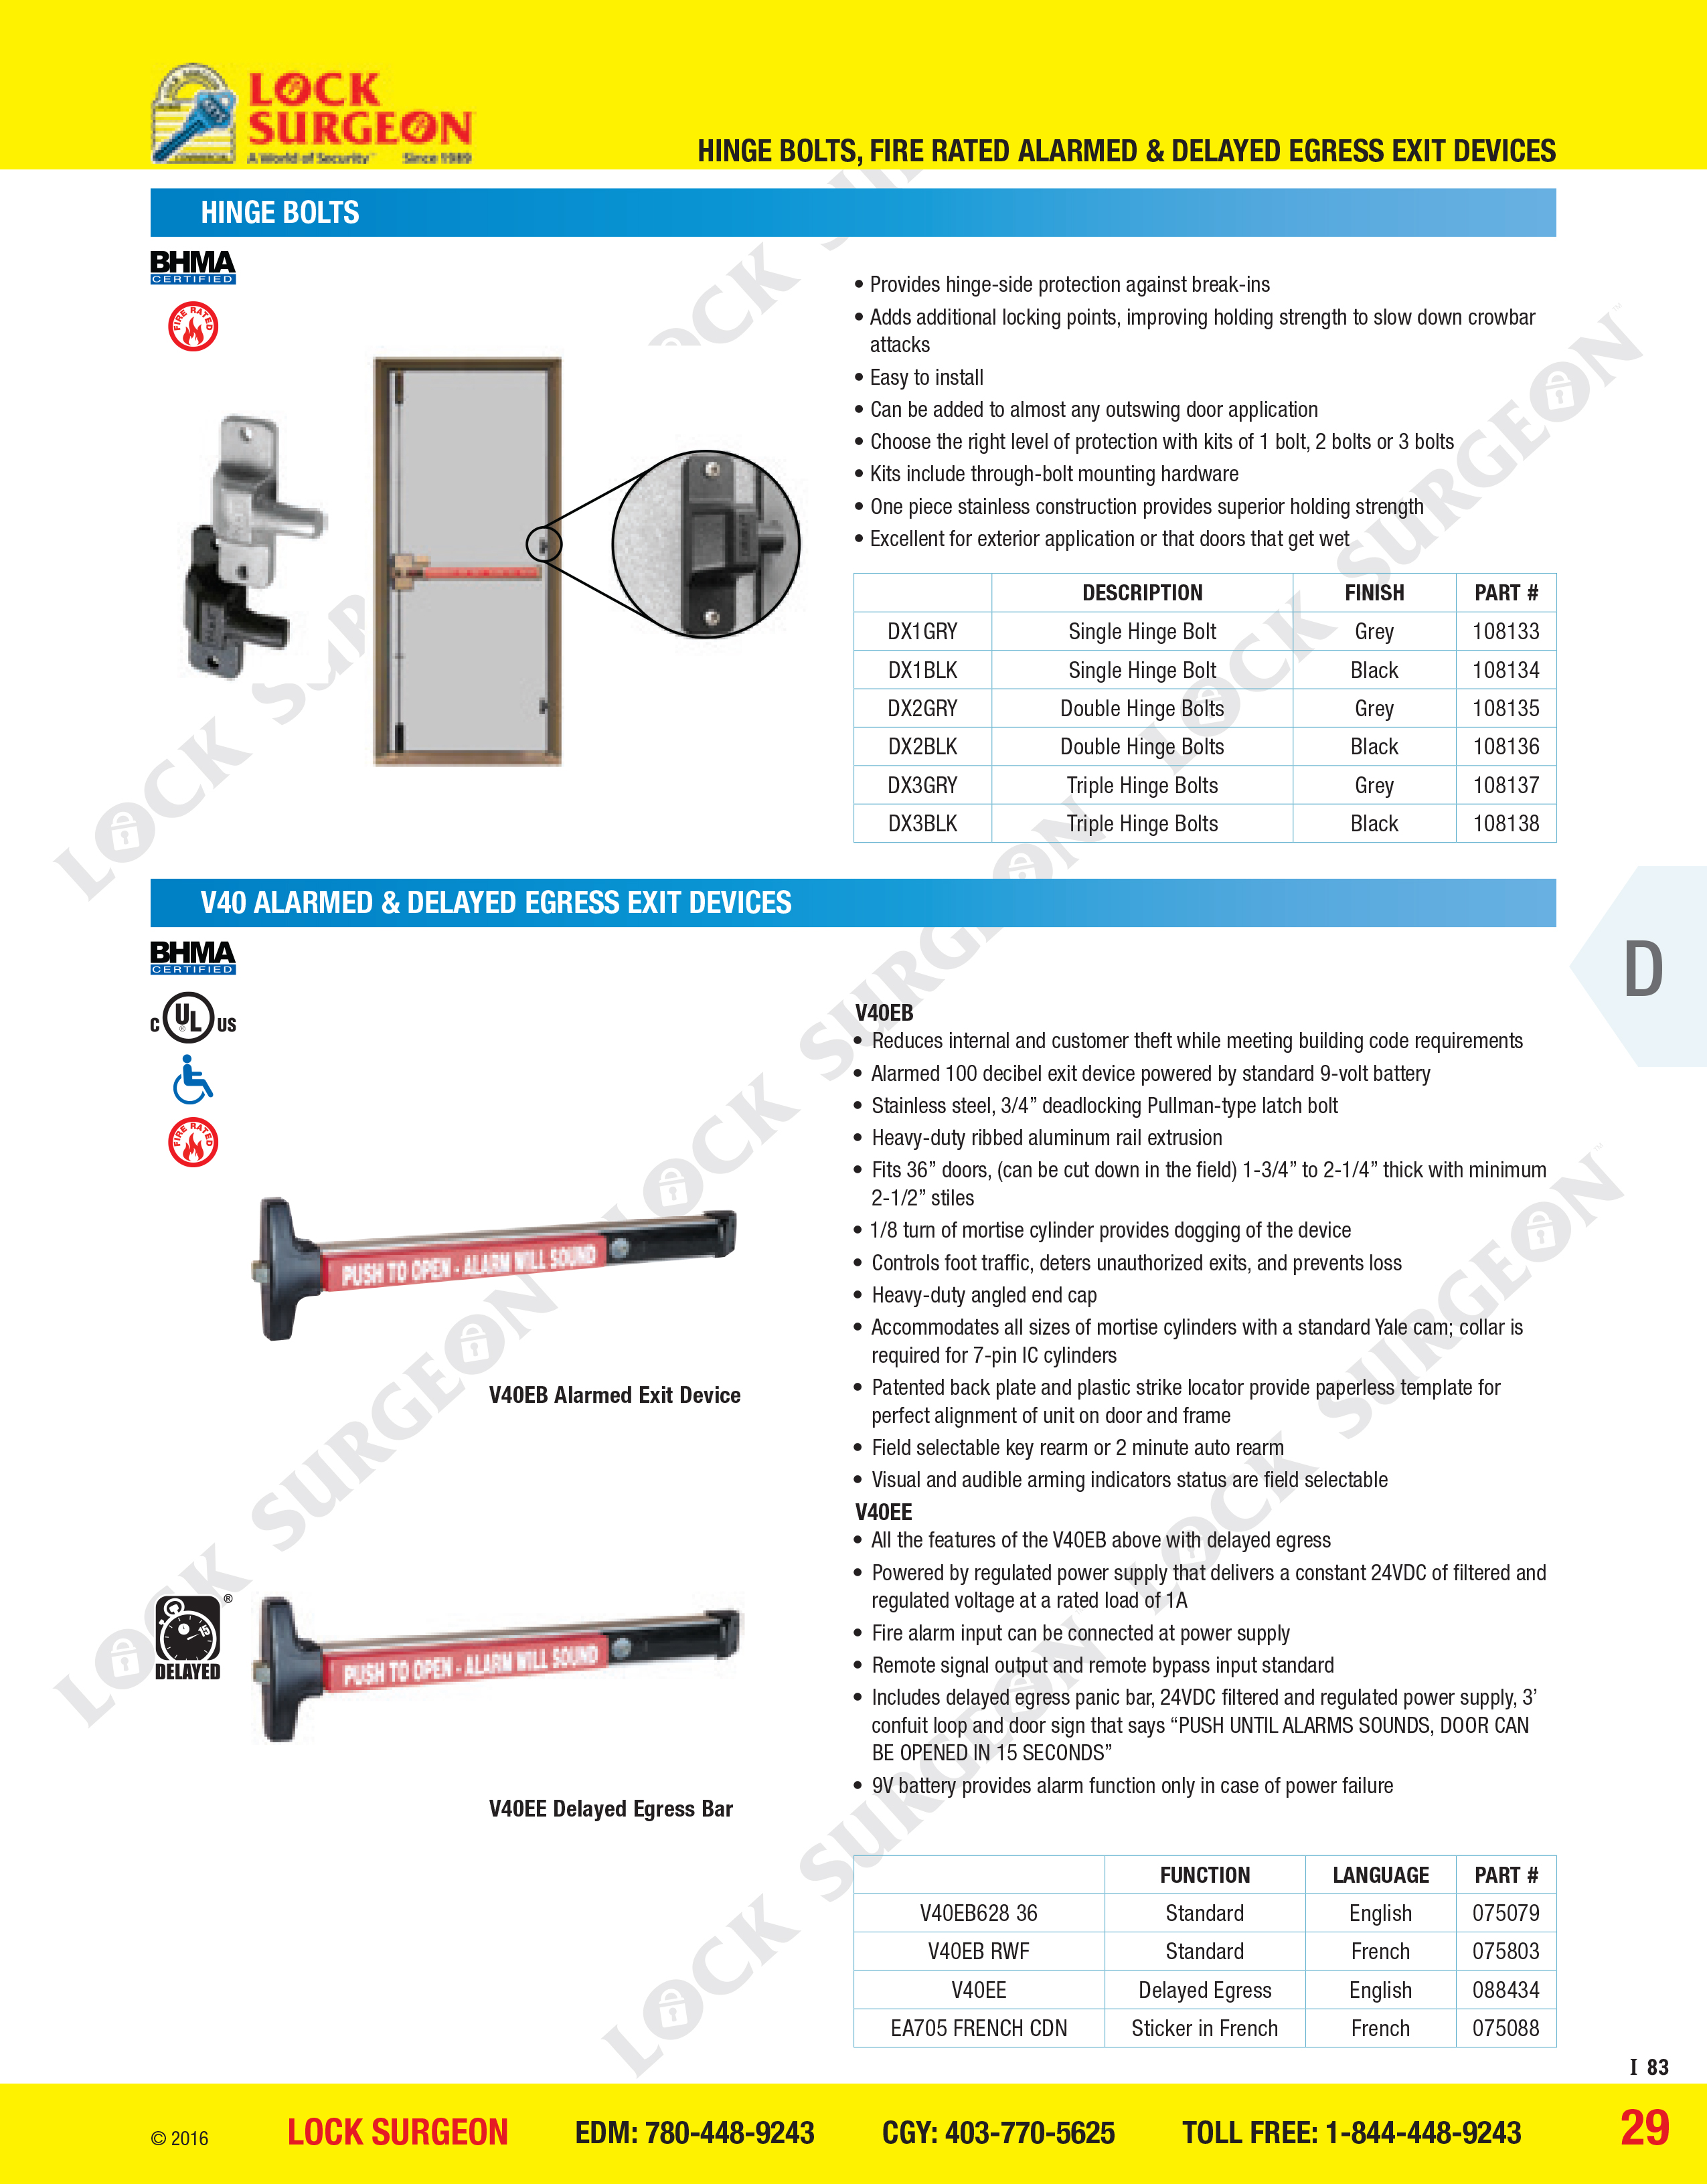 Detex Hinge bolts, V40 Alarmed and delayed egress exit devices, fire-rated & alarmed.